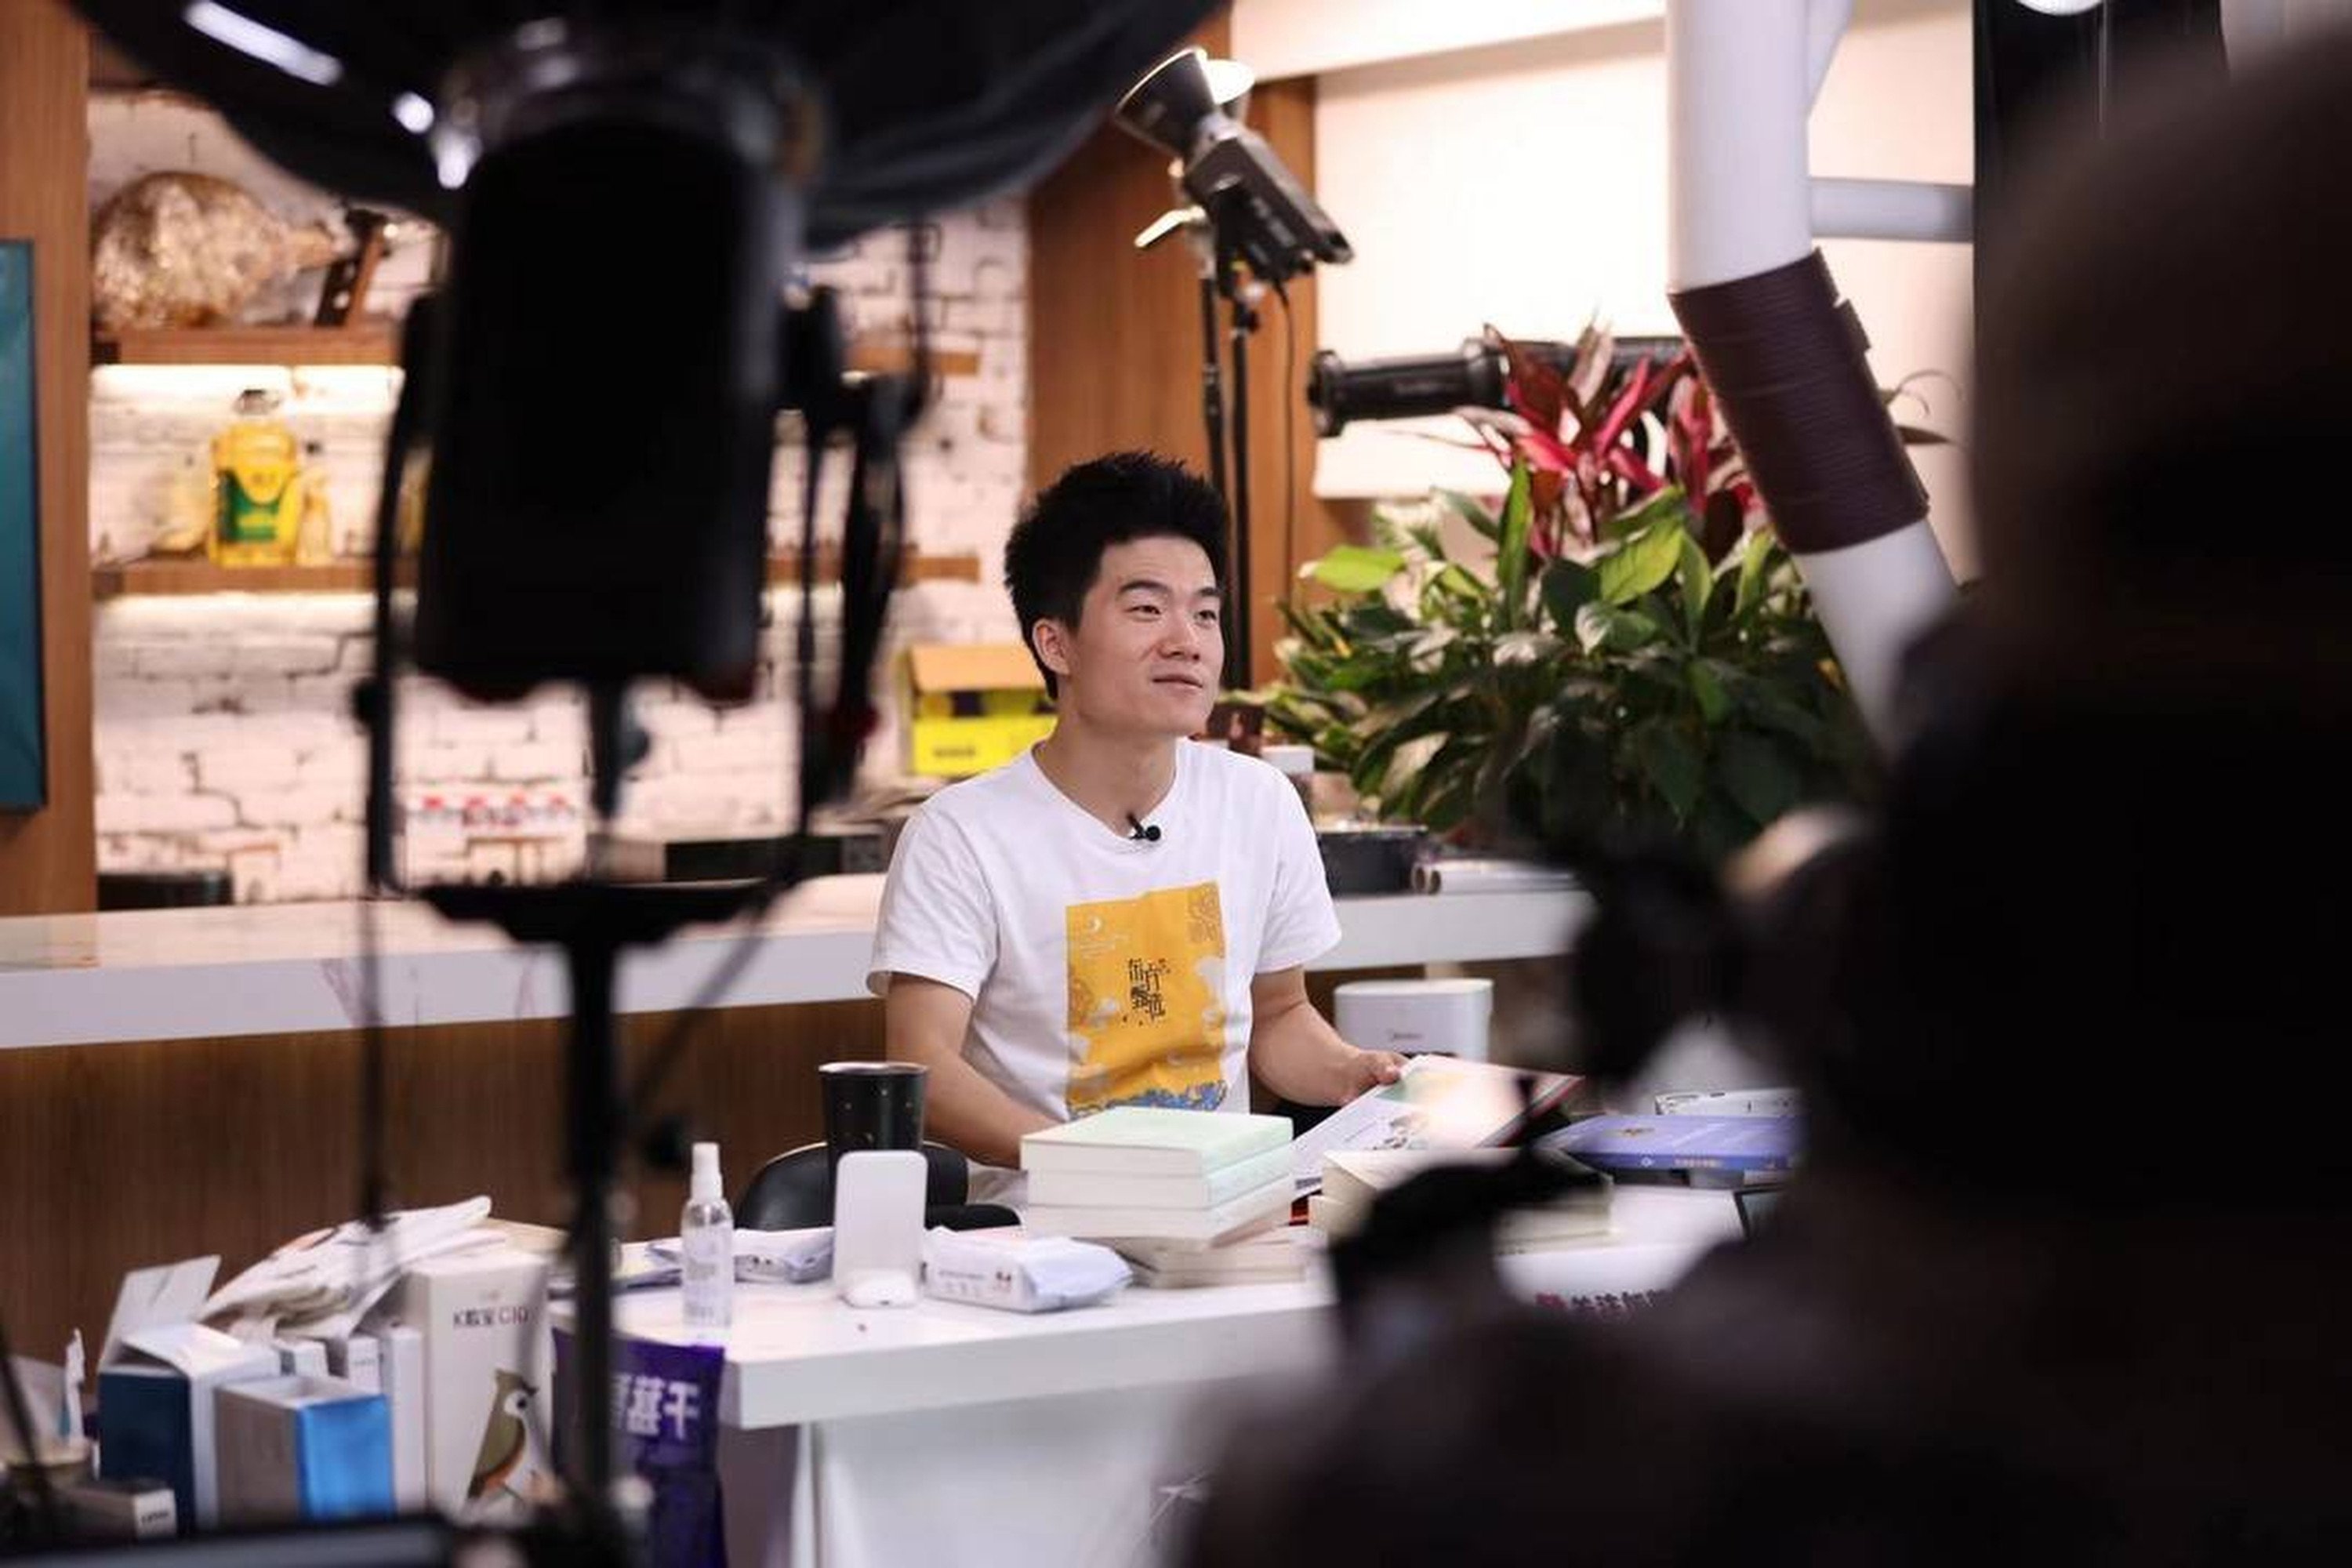 Dong Yuhui, a former English tutor, has emerged as a powerful live-streaming e-commerce influencer after infighting at New Oriental’s East Buy resulted in him becoming partner. Photo: Weibo